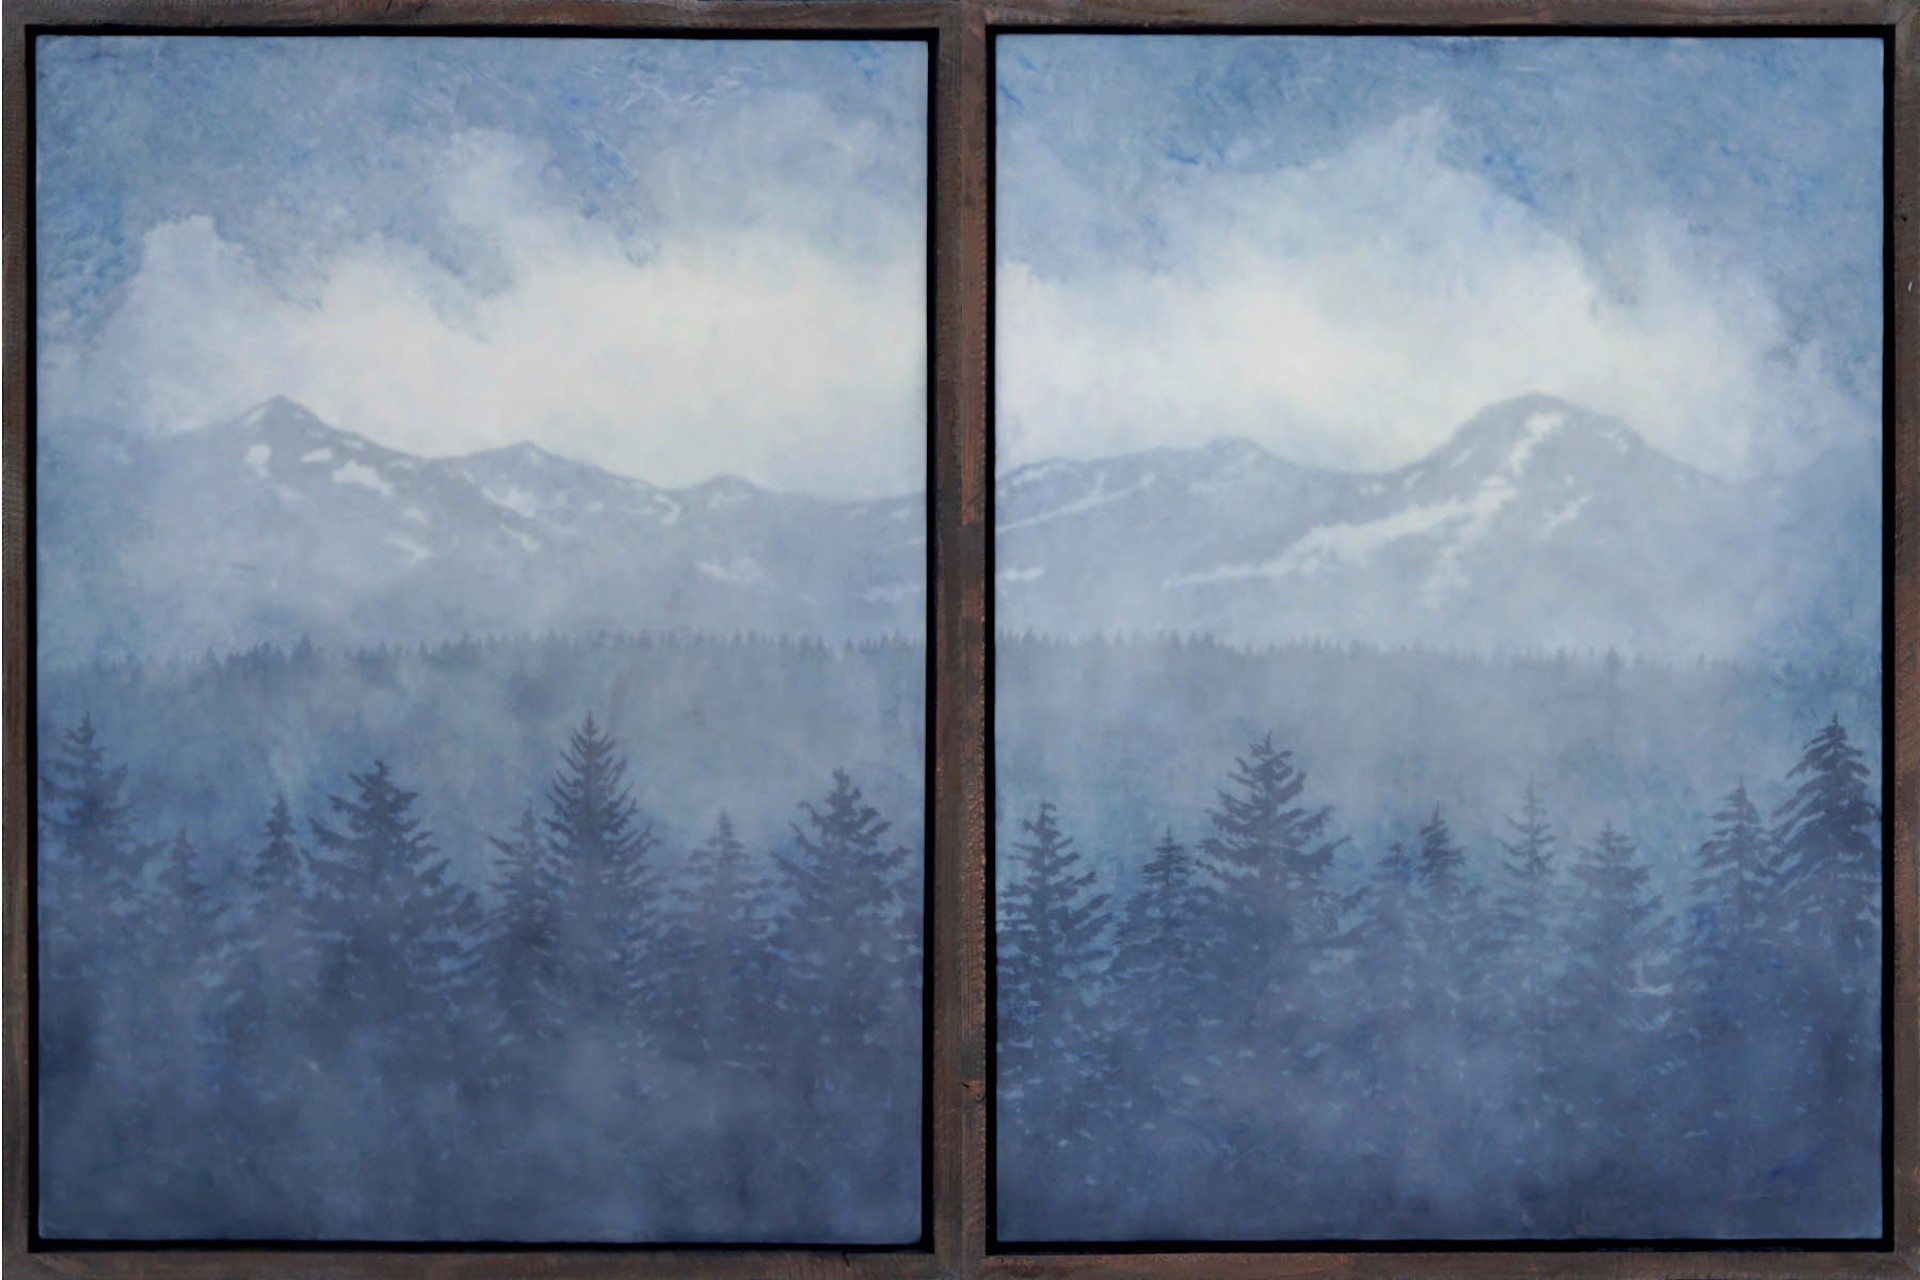 Original Encaustic Landscape Painting Featuring A Blue Tinted Mountain Range Through Hazy Clouds With Pine Trees